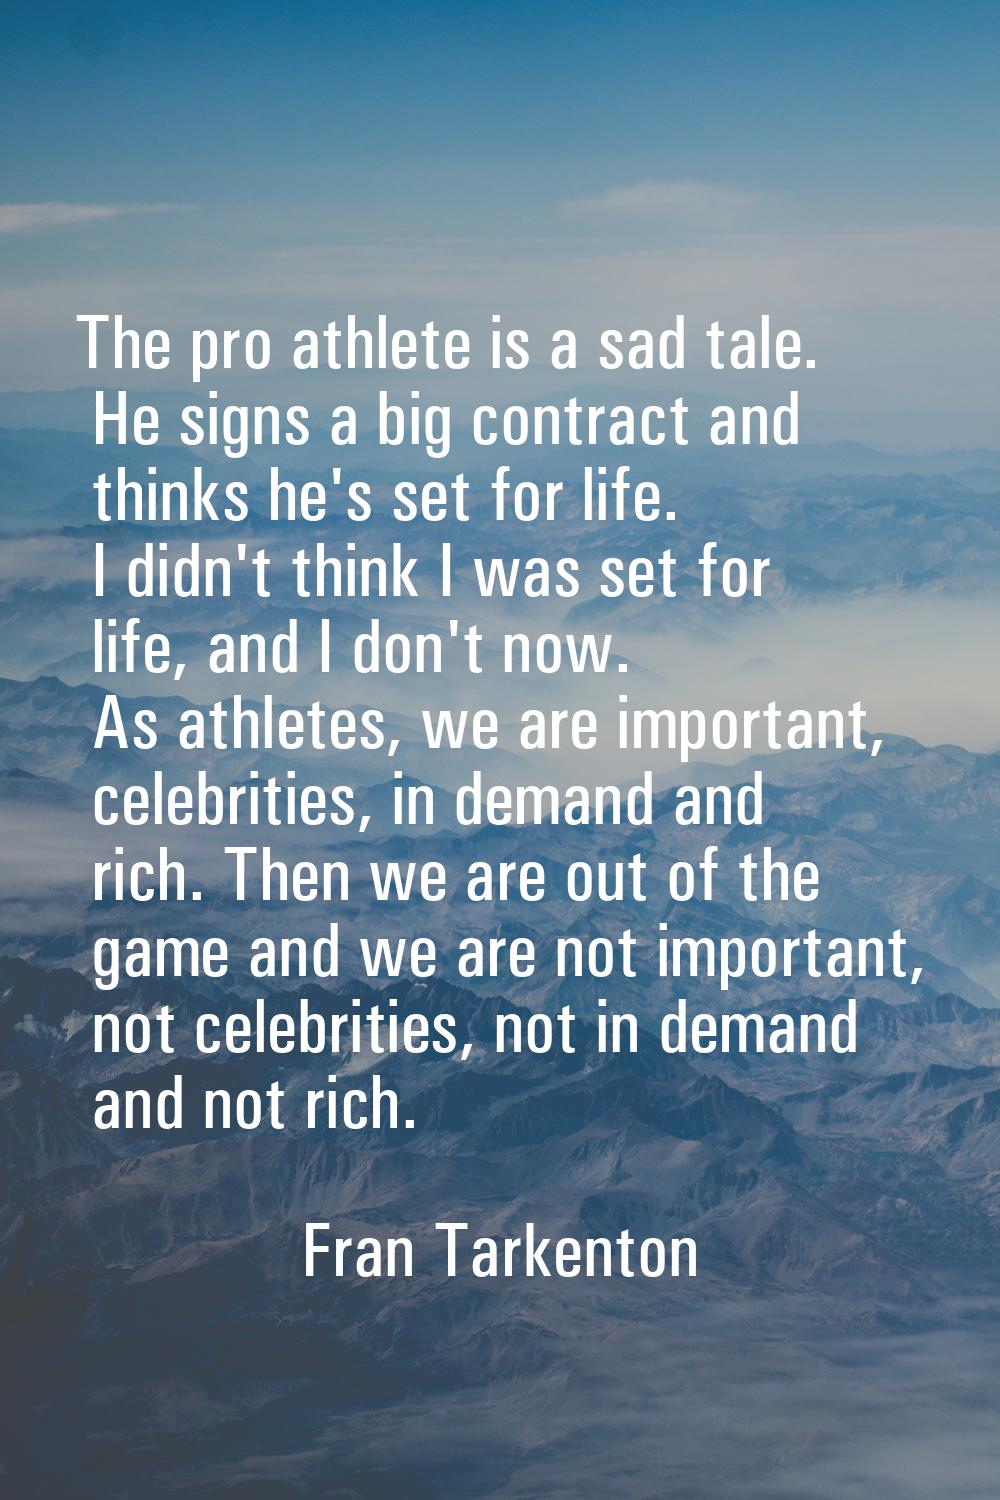 The pro athlete is a sad tale. He signs a big contract and thinks he's set for life. I didn't think